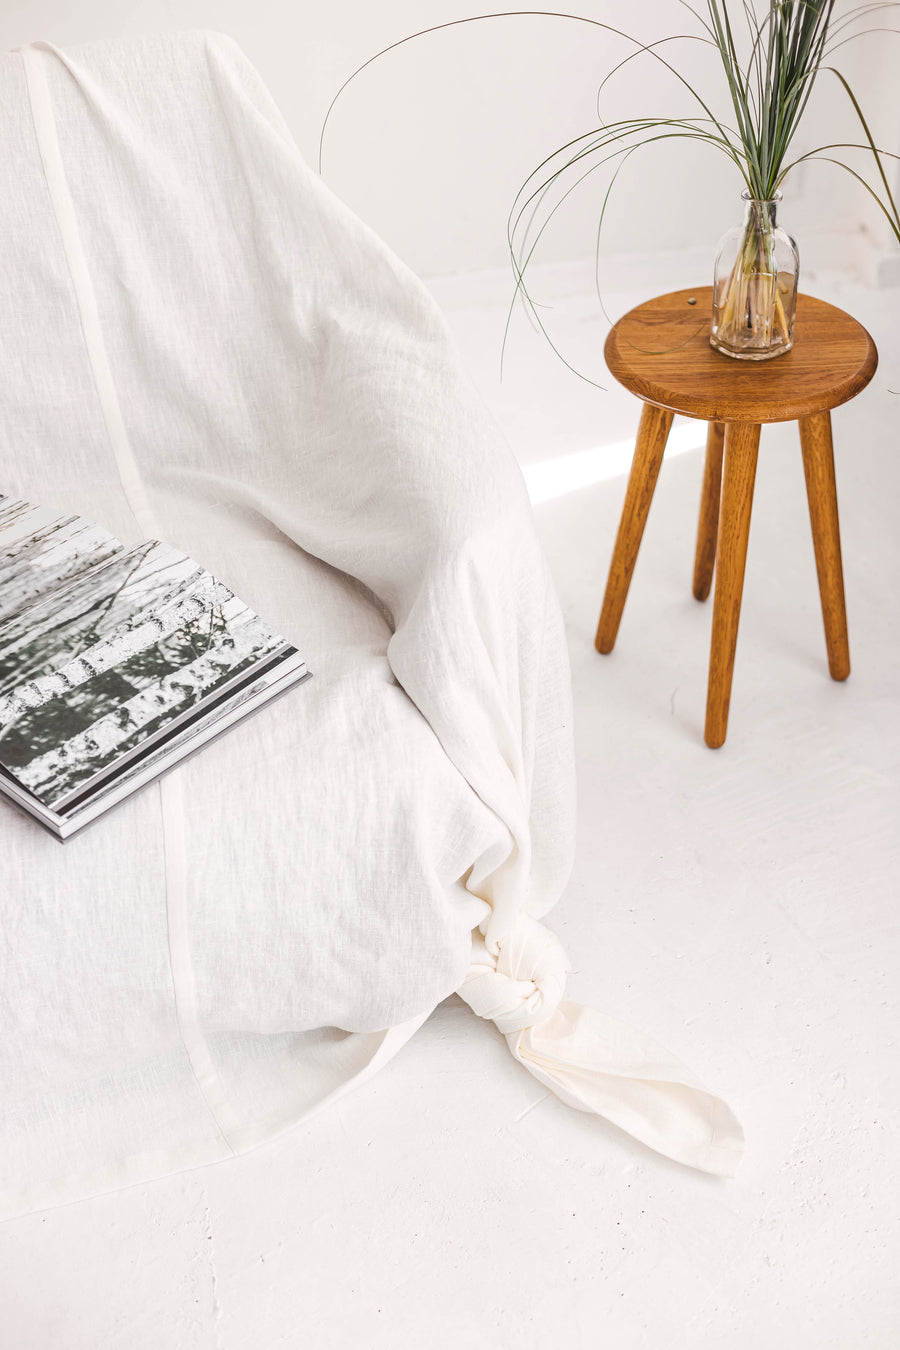 White linen couch cover